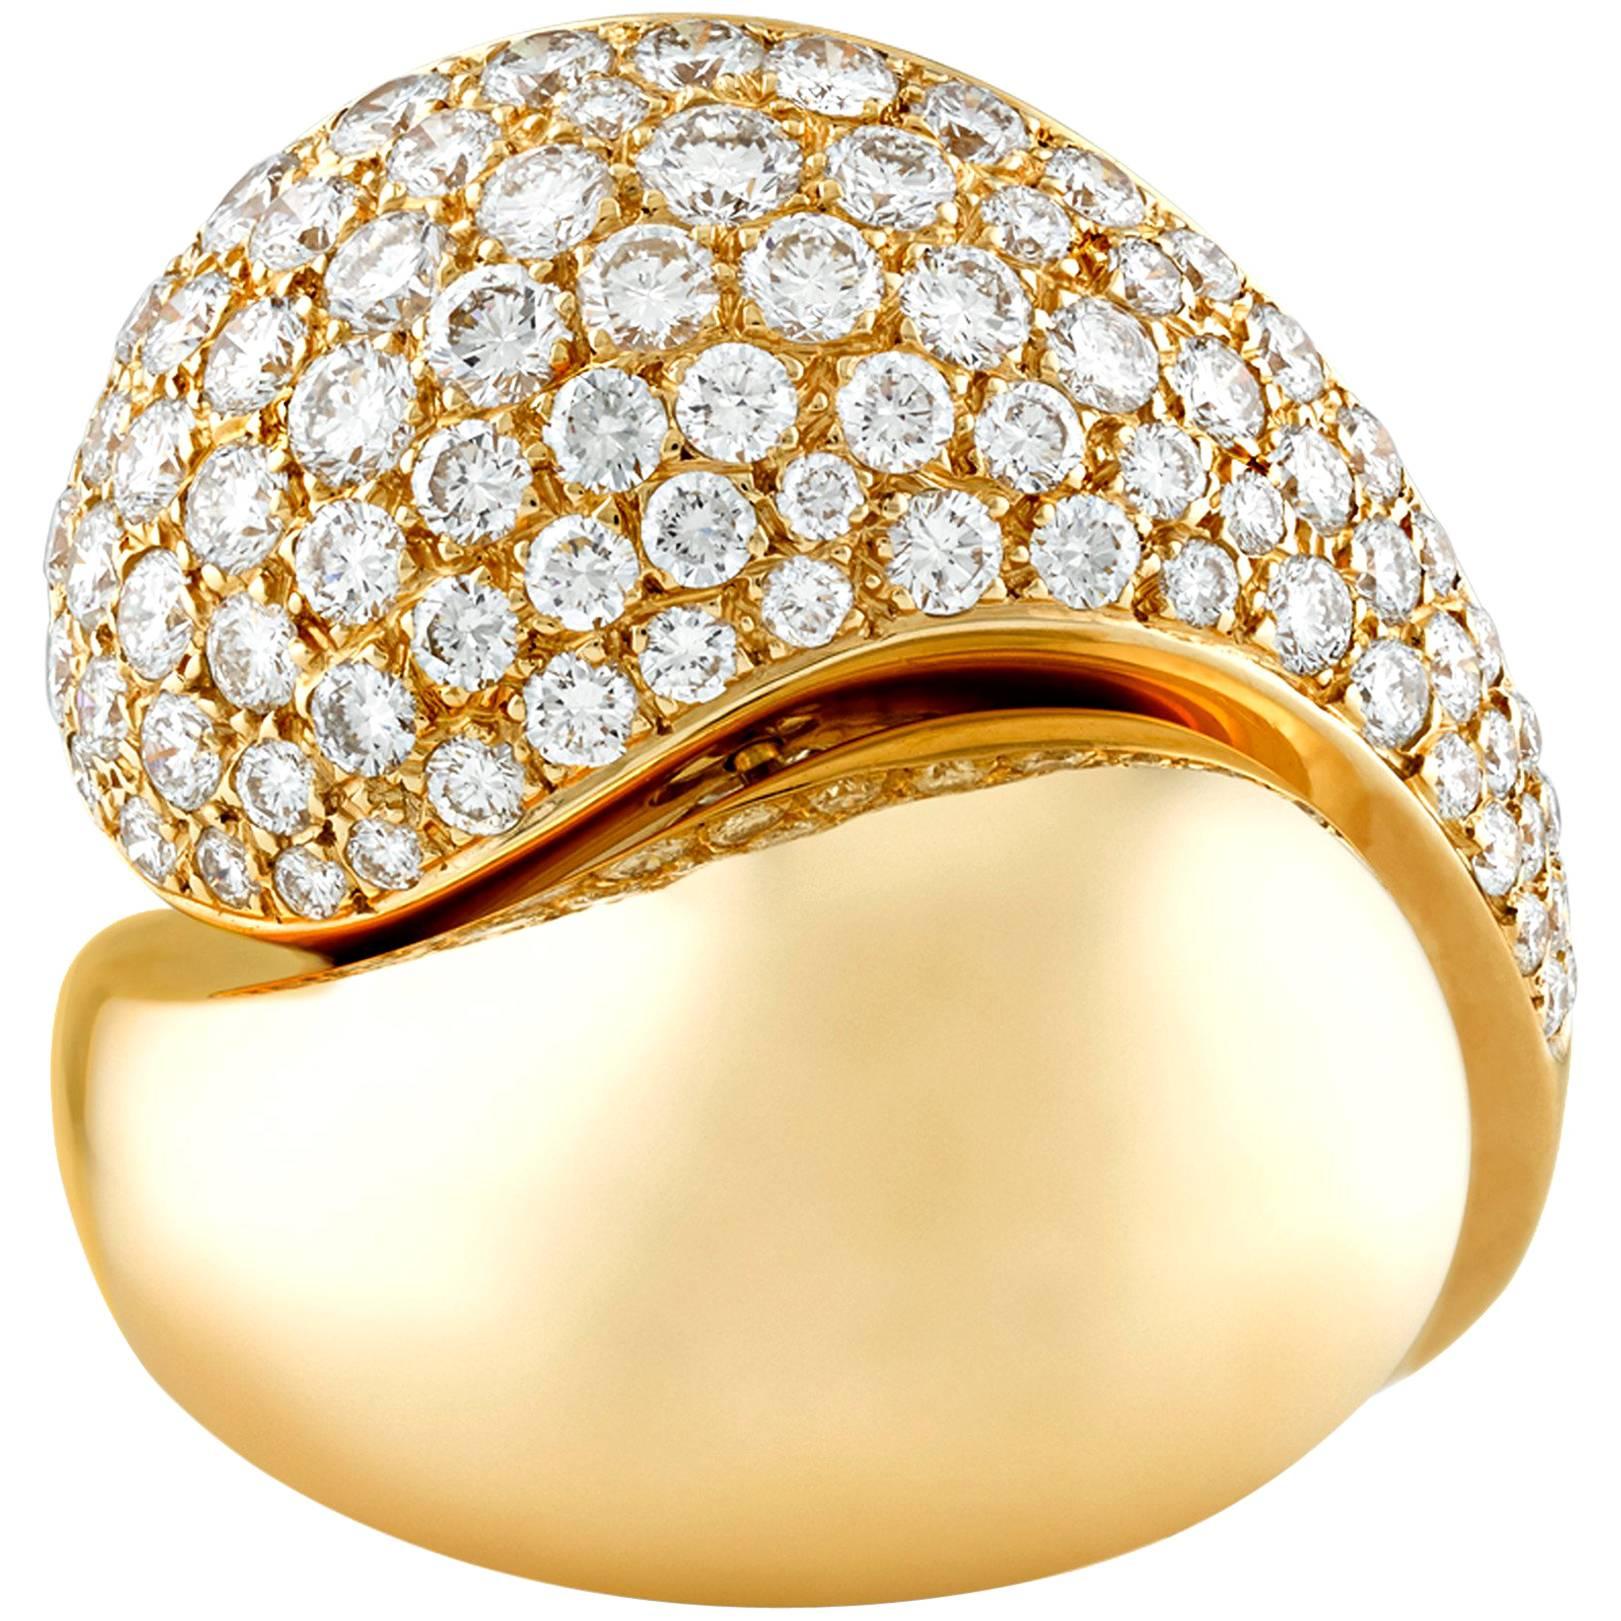 Diamond Crossover Ring by Cartier